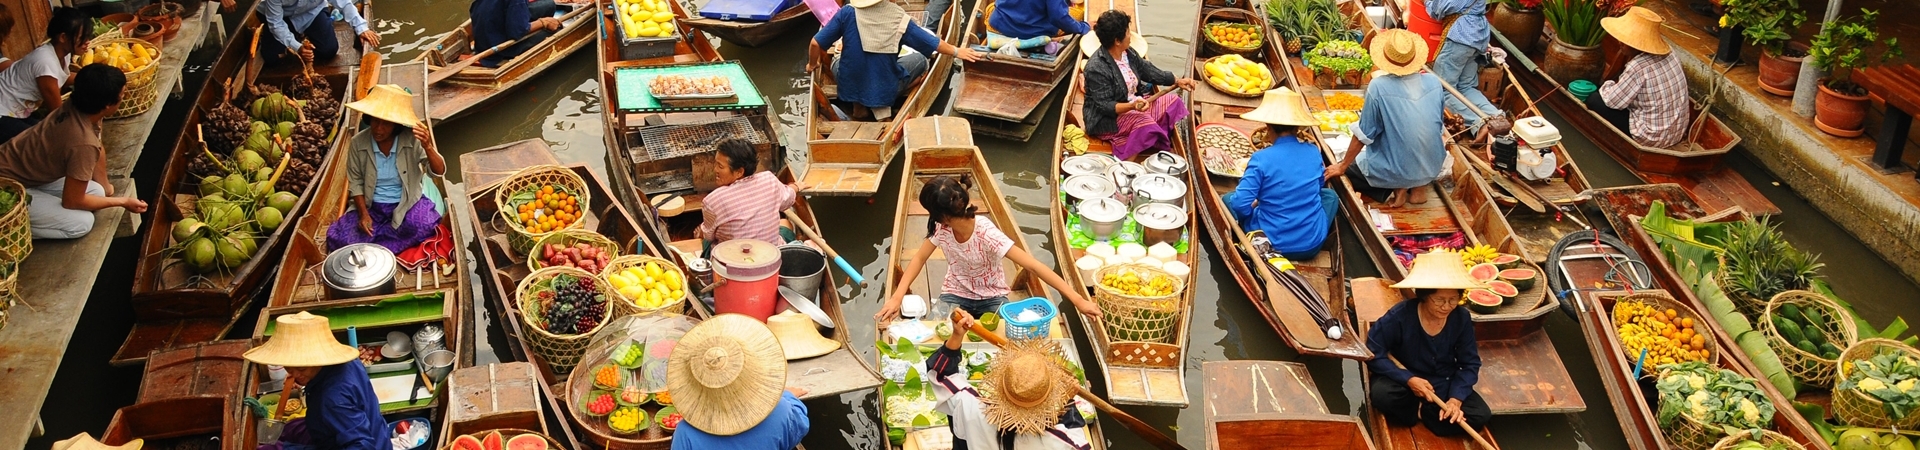 Image of Floating Markets & Backroads by Bike PVT, Incl.Trsf